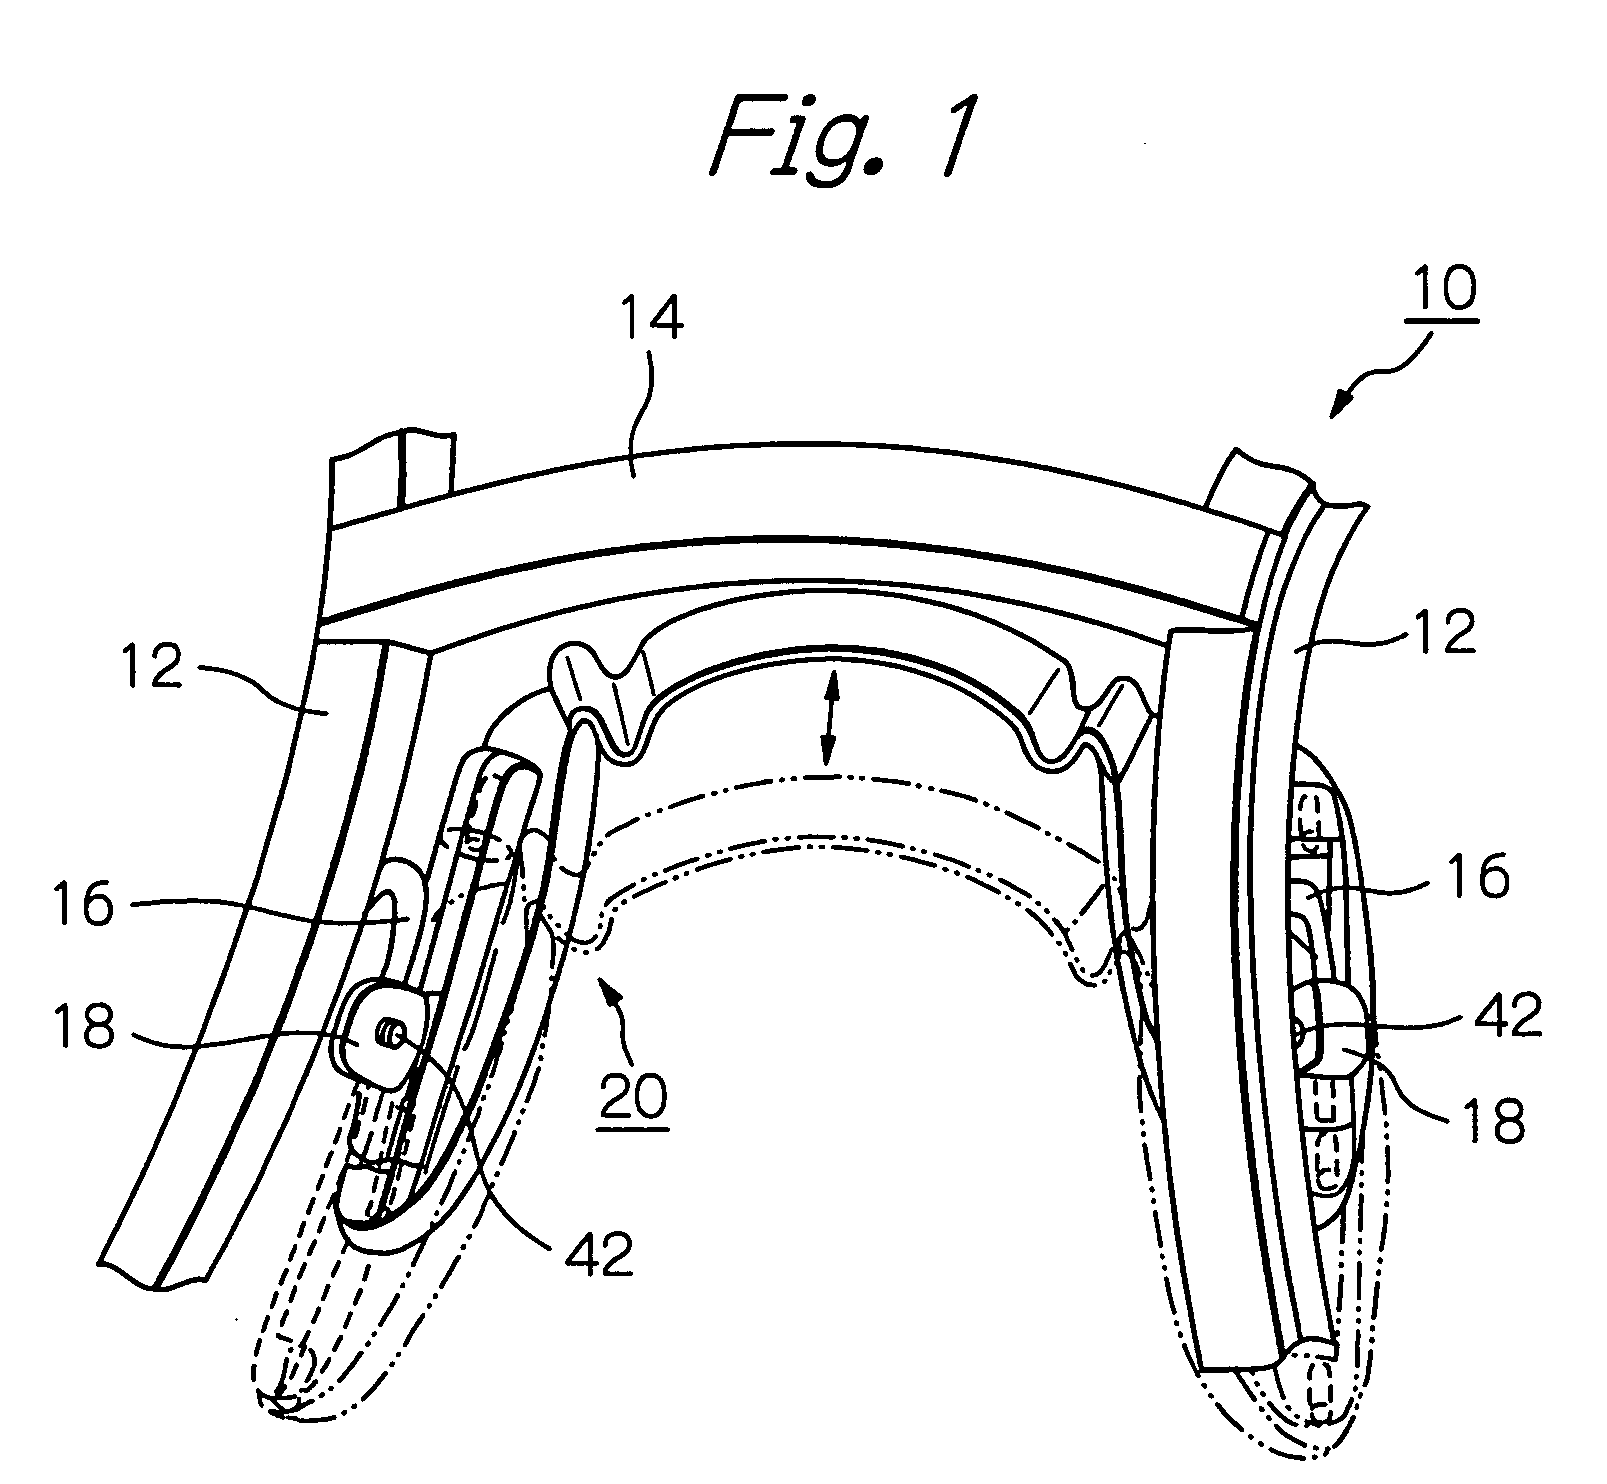 Nose pad assembly for an eyeglass frame